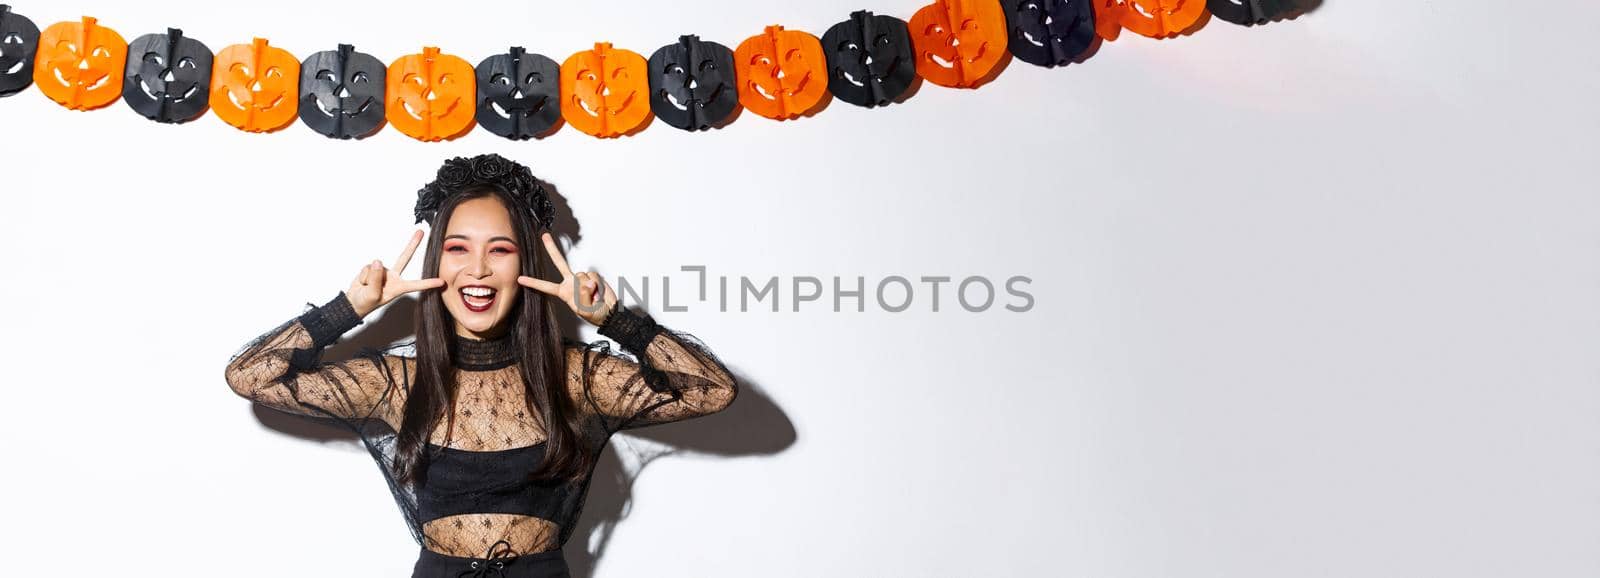 Cute happy asian woman enjoying halloween party, showing peace gesture and smiling, wearing witch costume, standing against pumpkin banners decoration.